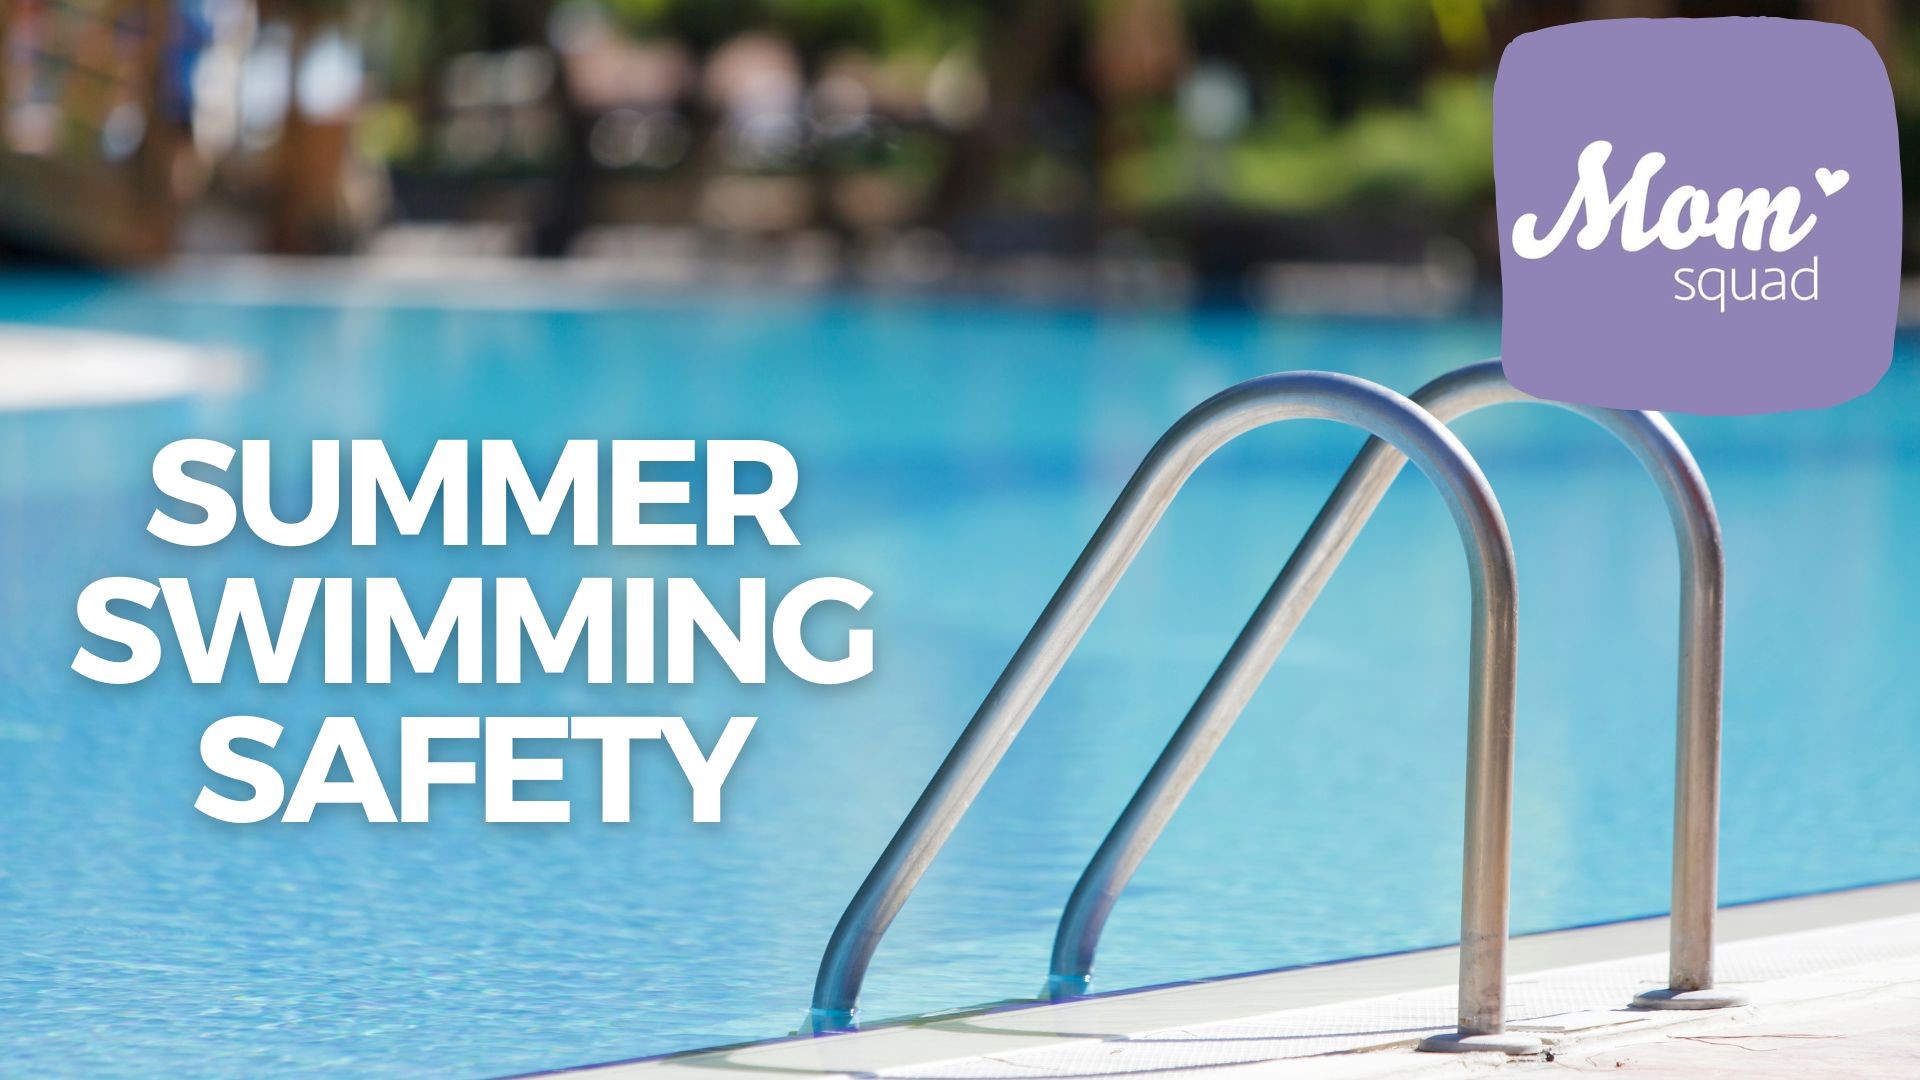 Maureen Kyle speaks with a swimming instructor on how to keep your kids safe around water, and how to handle lessons for all ages.